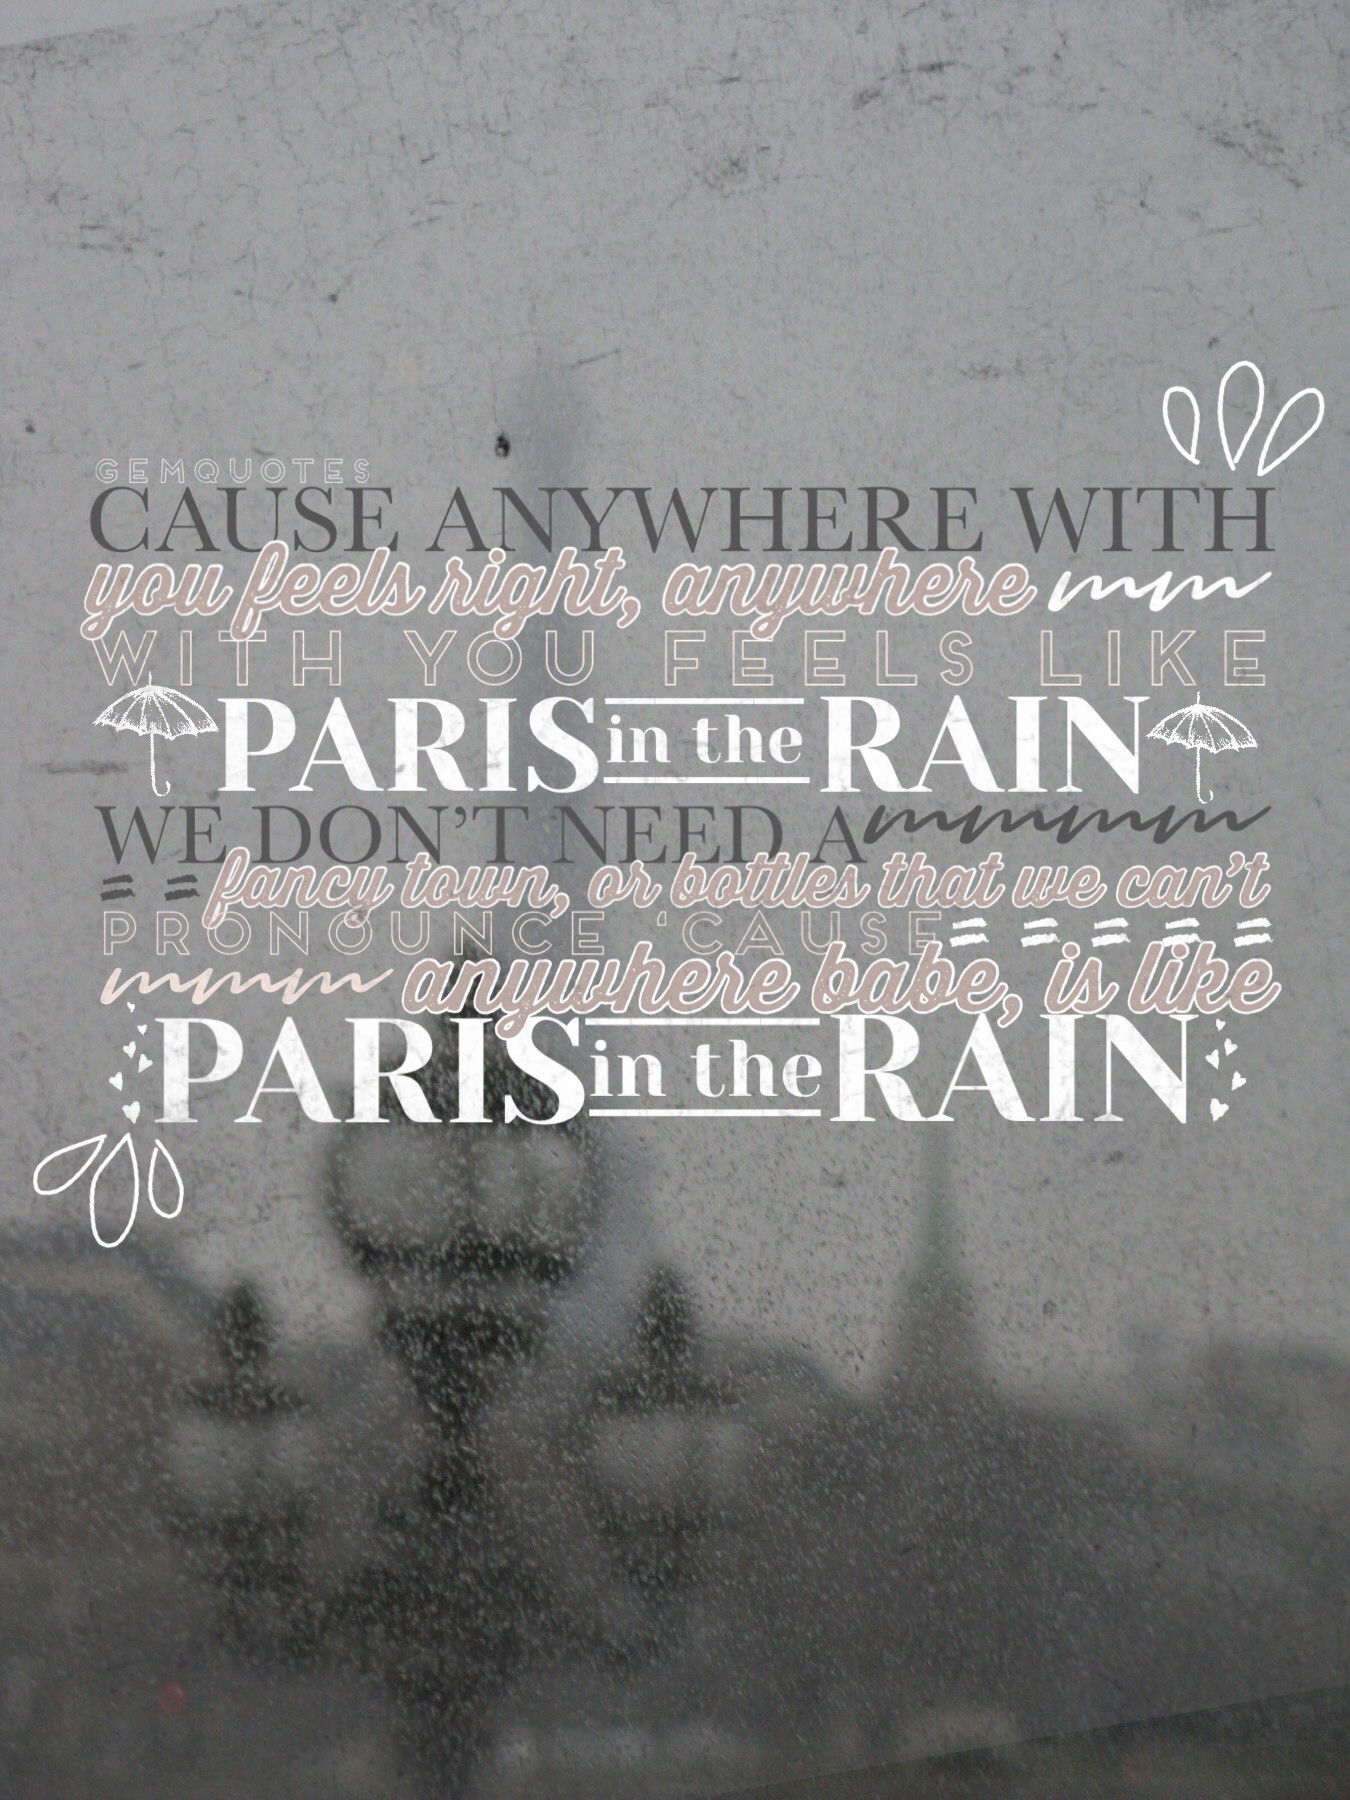 “🌧tap🌧”
“Paris in the Rain” by Lauv AKA my new fav song because it’s so good and so sweet, go listen to it🗼🎶 Hope you guys are doing well! I am tired beyond compare, but did manage to make this for you gems💎 sending rainy vibes and paris worthy love~💕